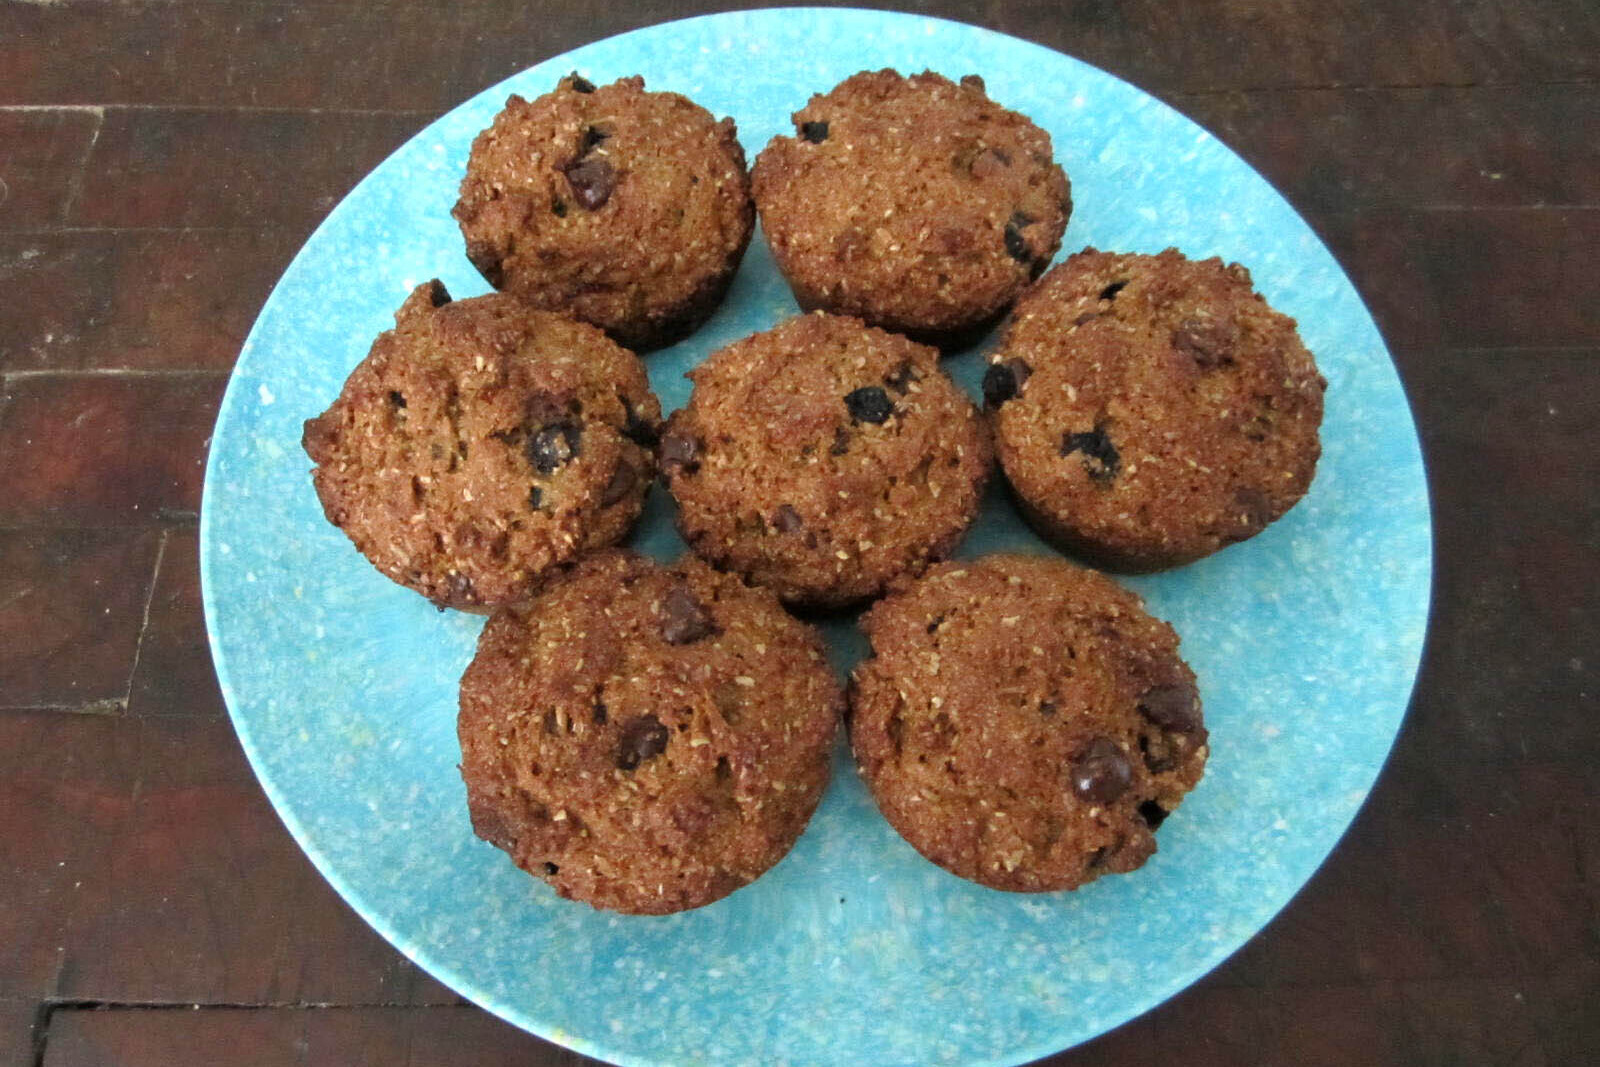 Seven bran muffins with blueberries and chocolate on a blue plate